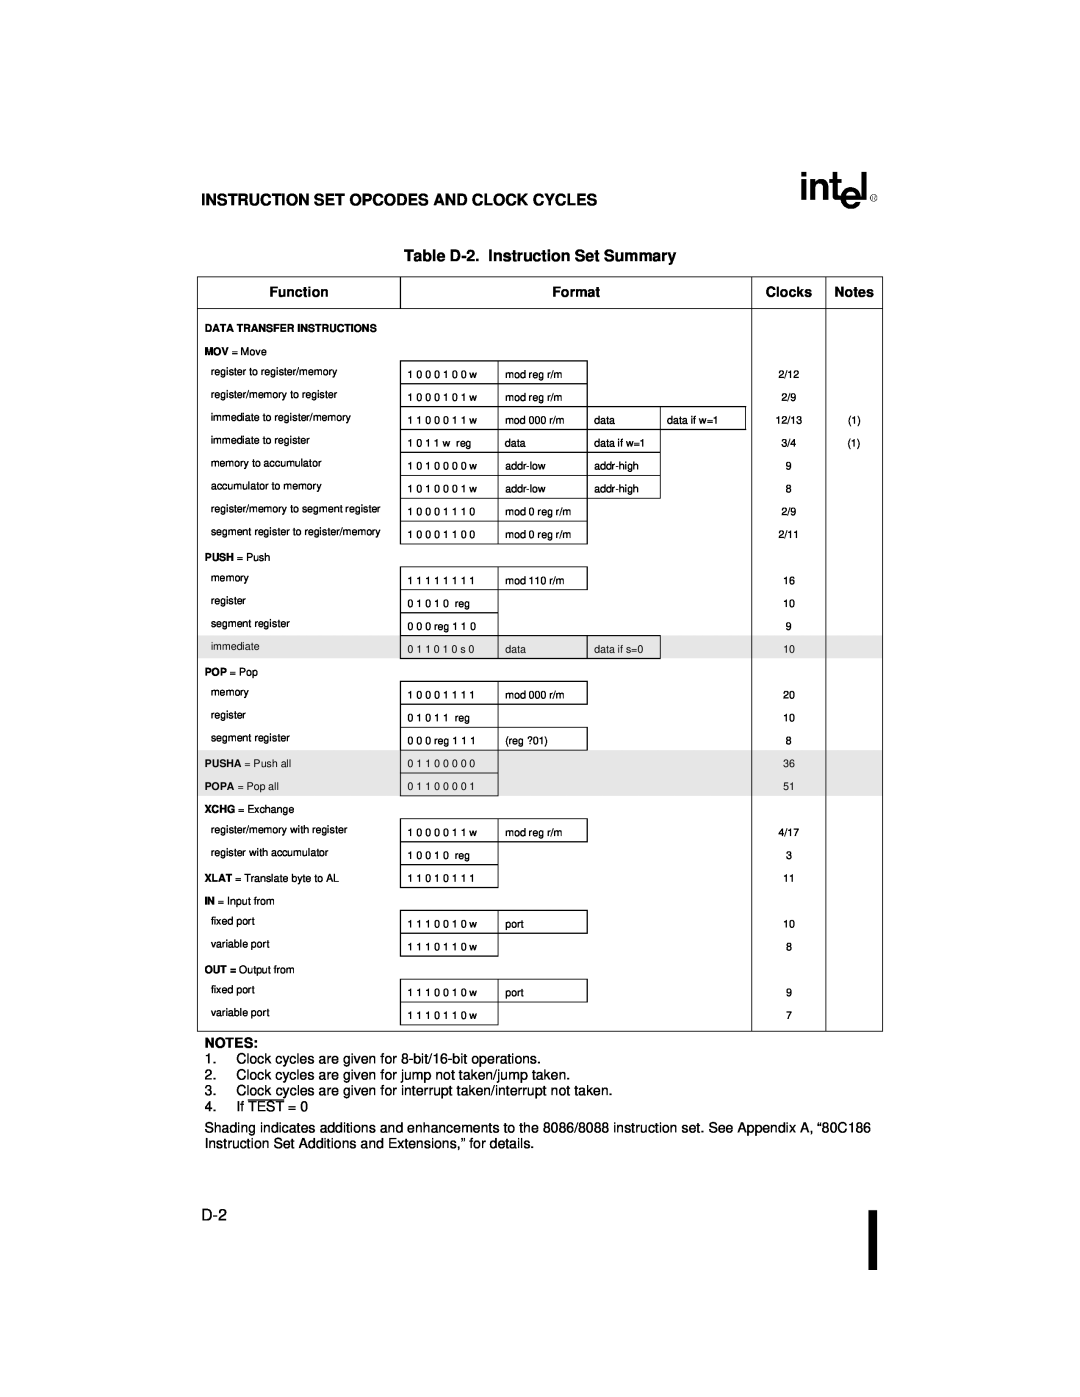 Intel 80C186XL Instruction Set Opcodes And Clock Cycles, Table D-2.Instruction Set Summary, Function, Format, Clocks 